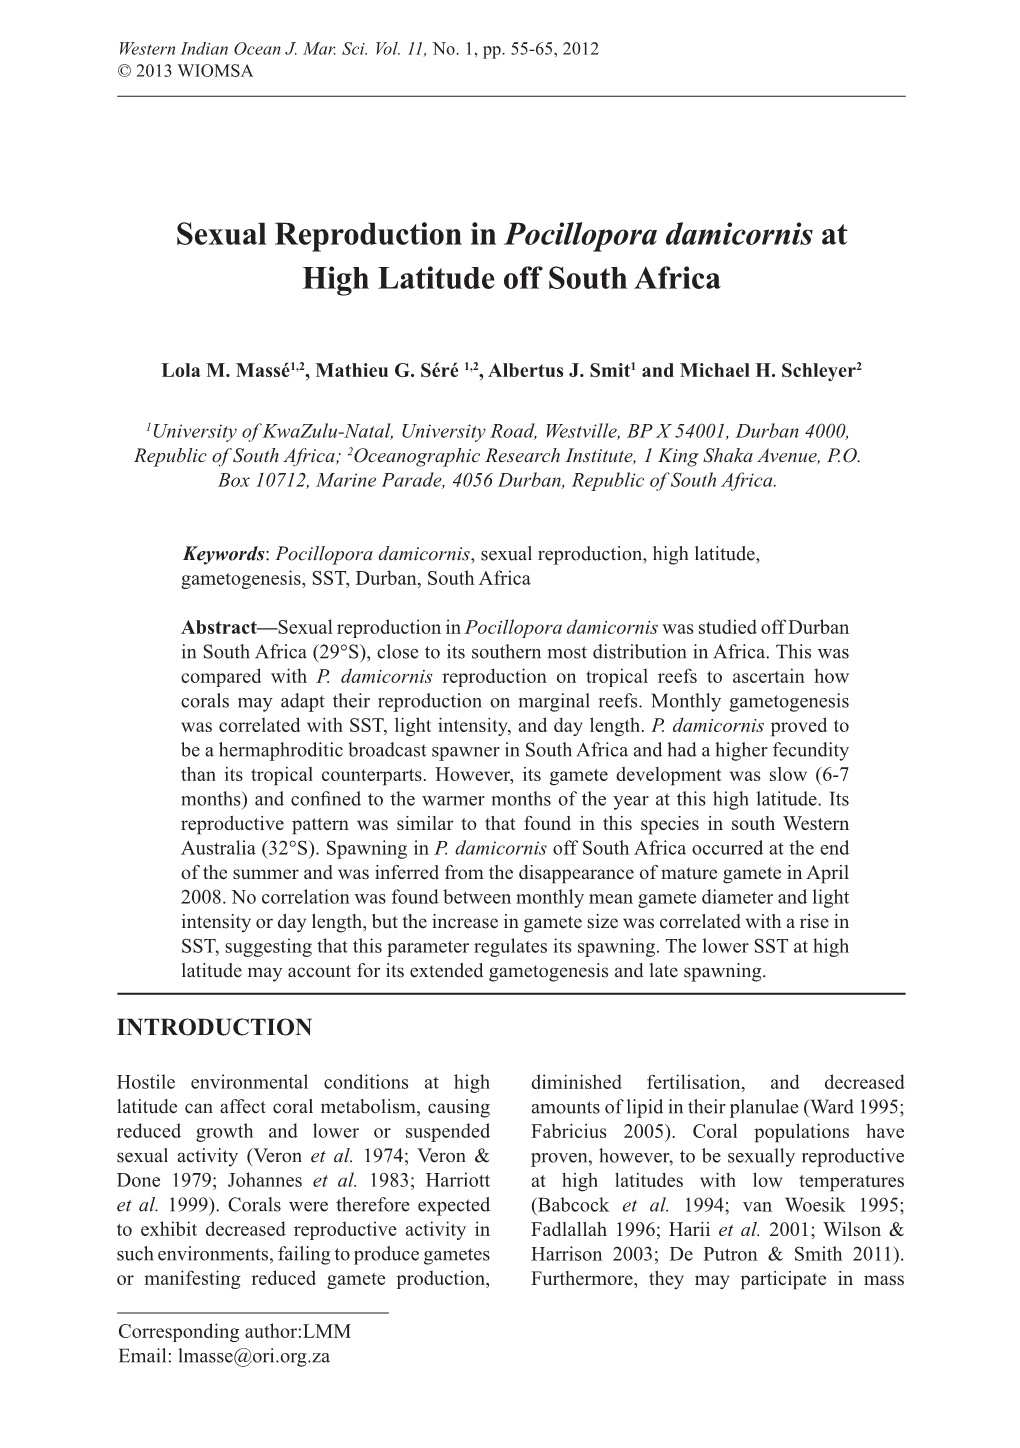 Sexual Reproduction in Pocillopora Damicornis at High Latitude Off South Africa